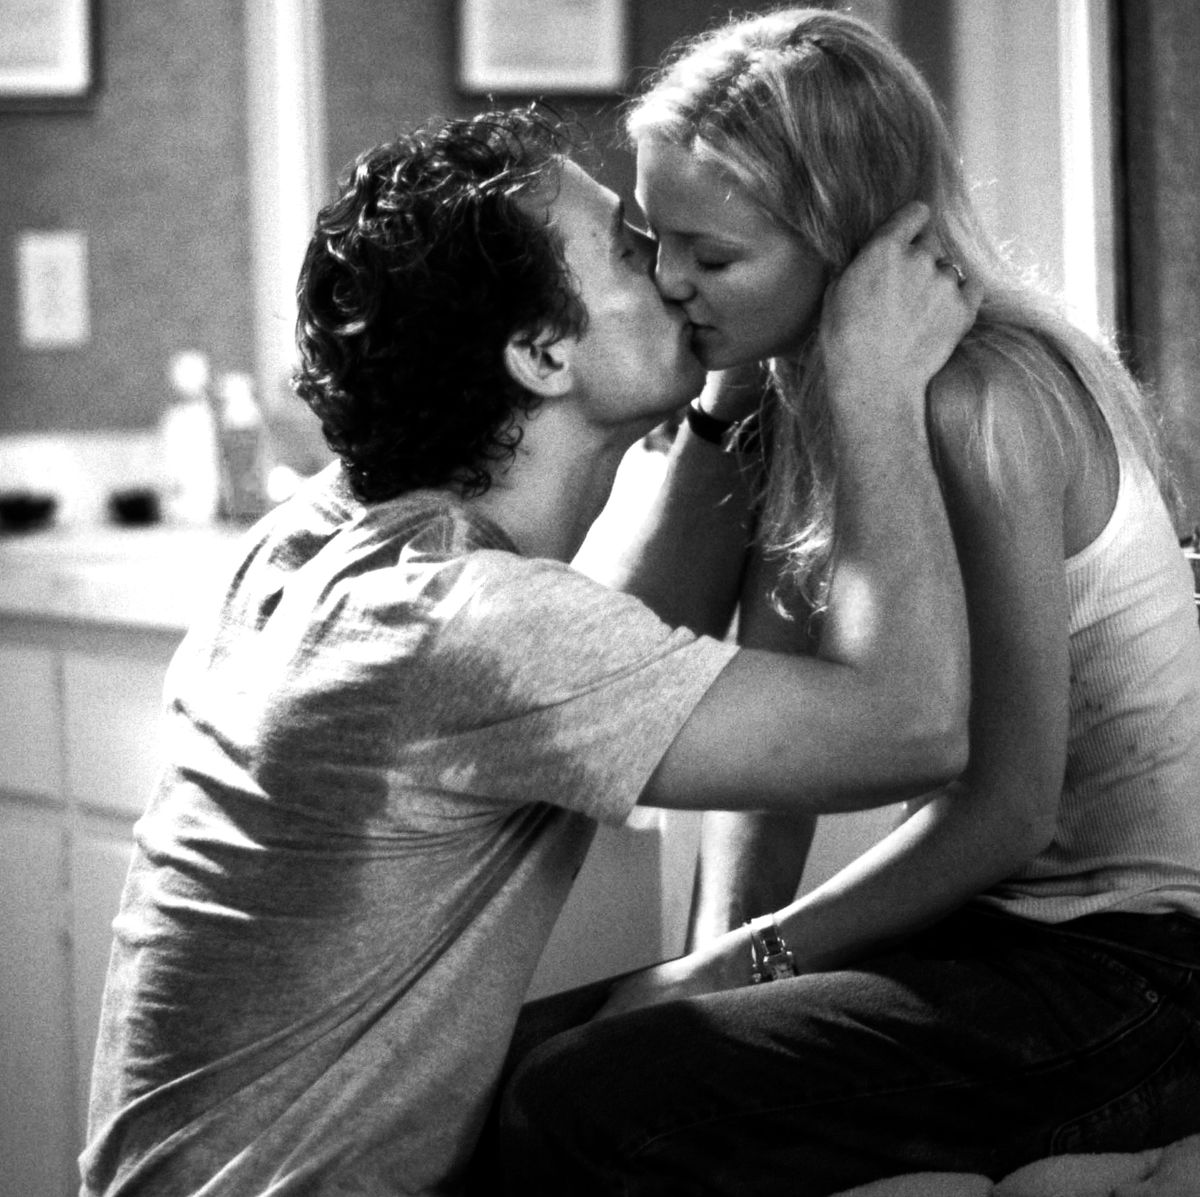 Heppy Kees Xxx - 50 Sexiest Kisses From Movies - Sexiest Kissing Scenes Ever